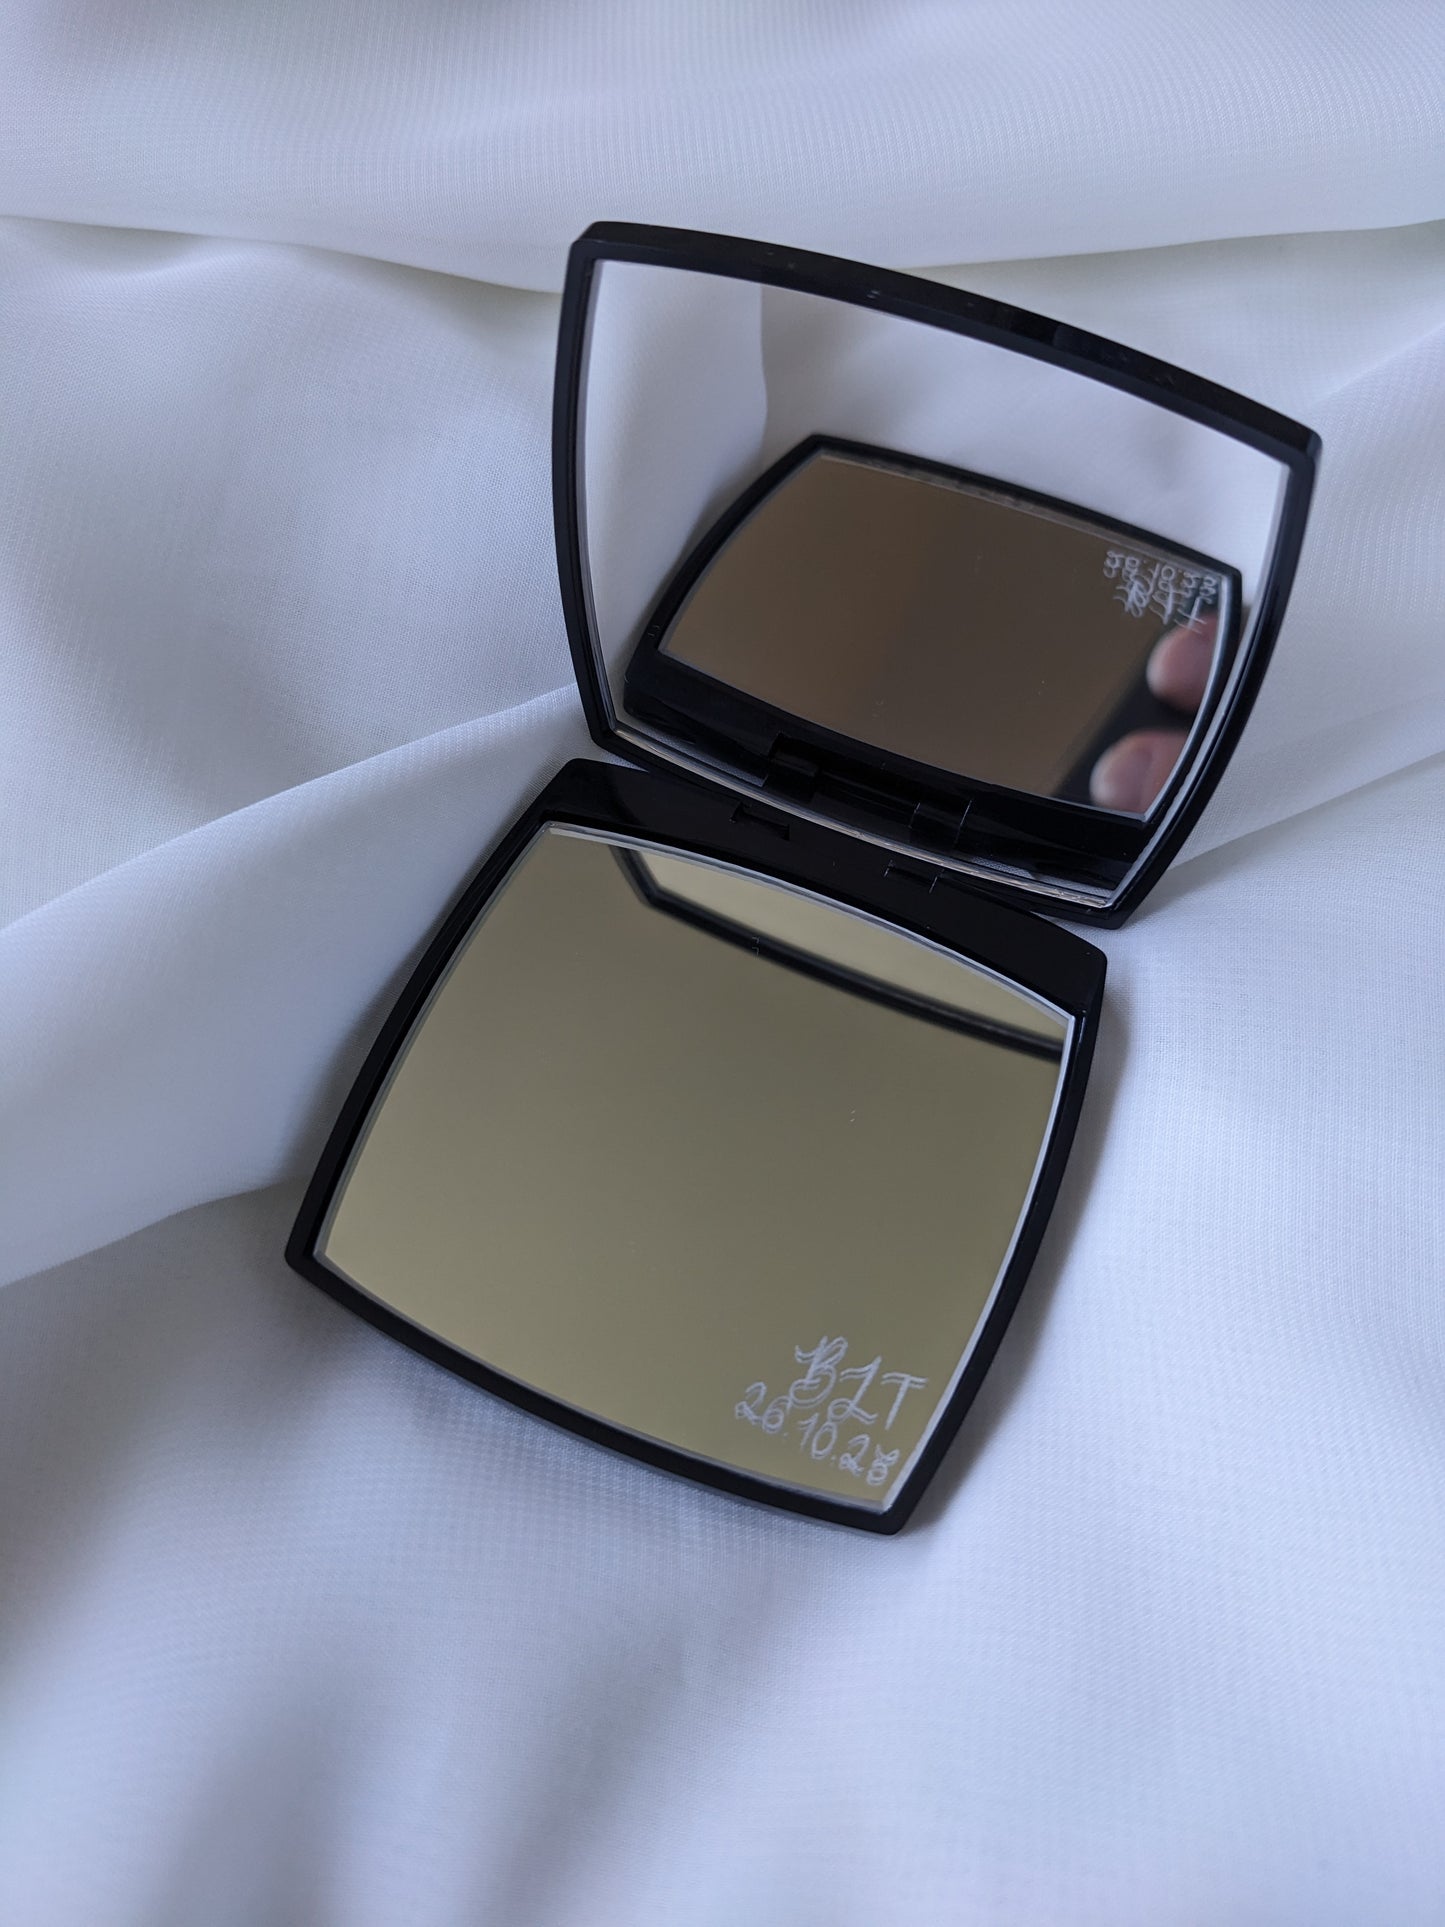 Engraved Chanel compact mirror